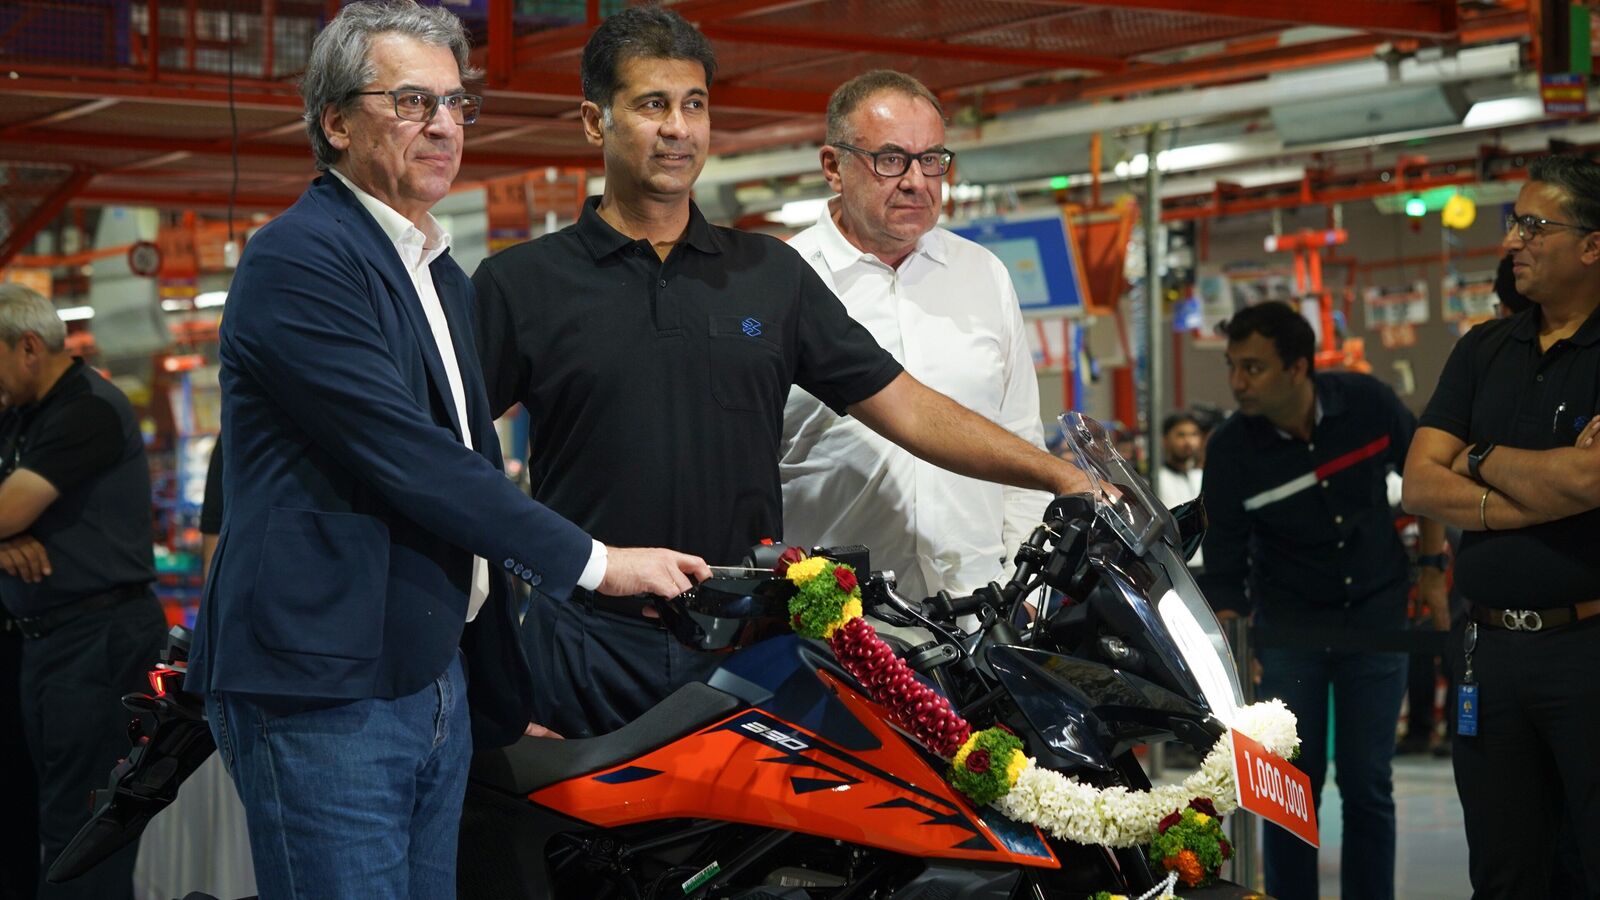 1 millionth KTM motorcycle rolls out of Bajaj Auto plant in Chakan, Maharashtra